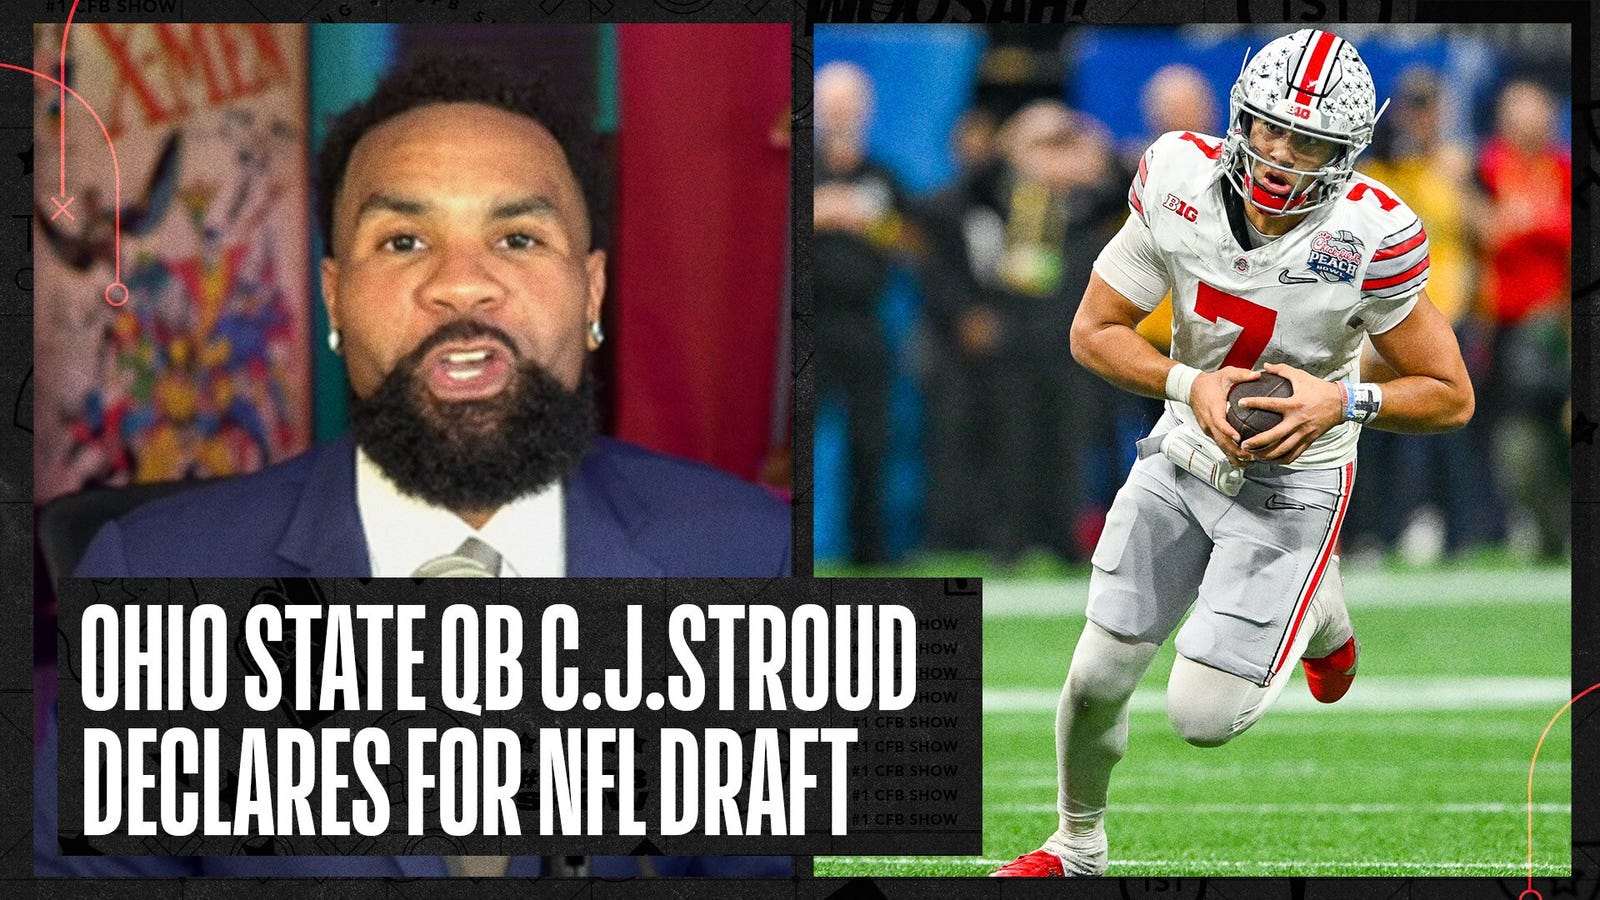 CJ Stroud declares for the NFL Draft